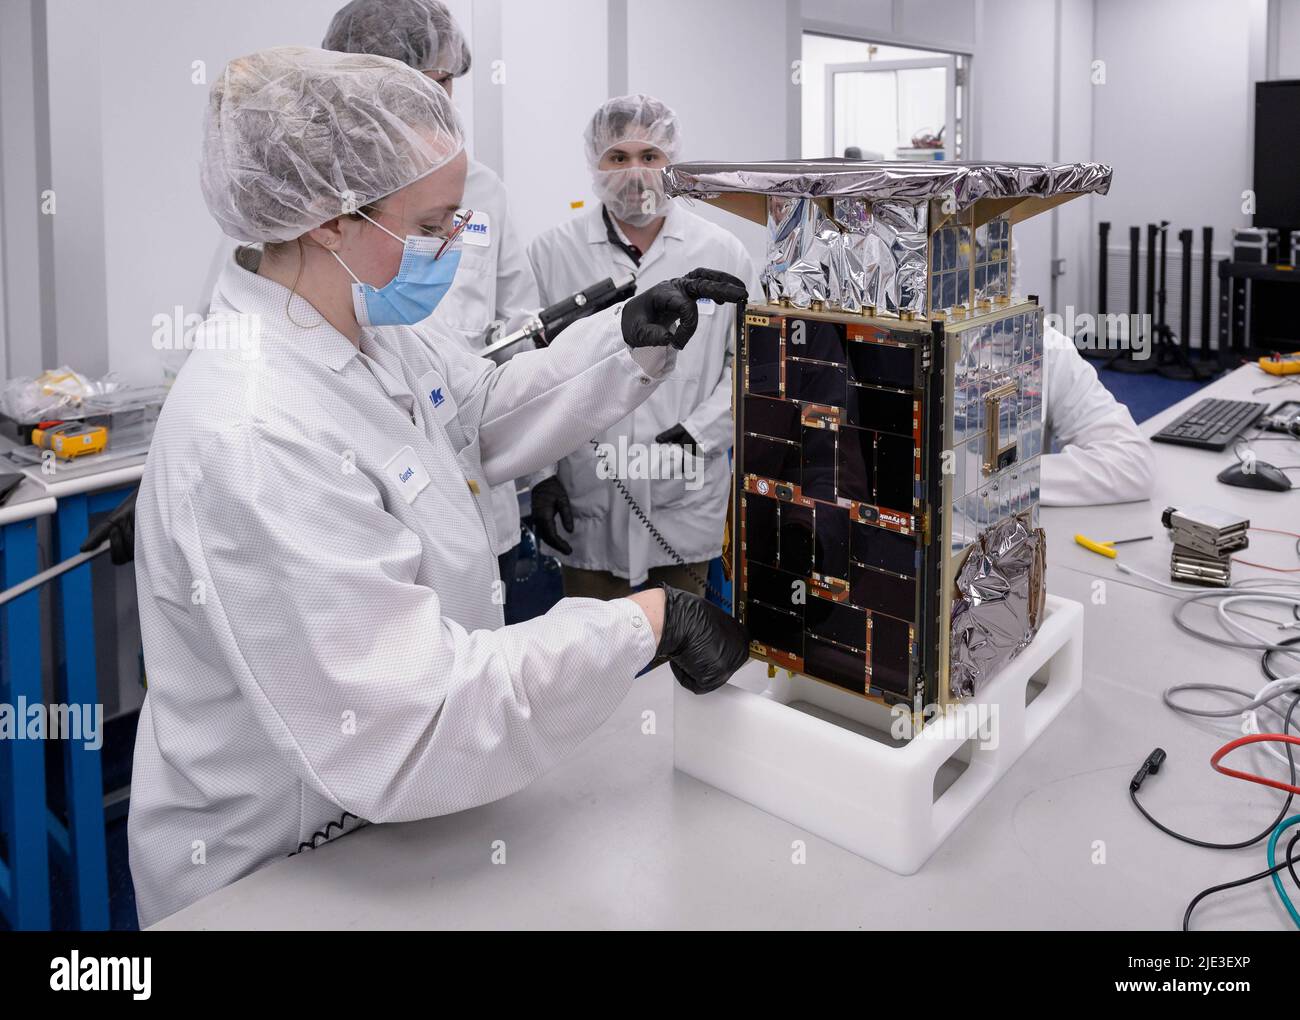 June 24, 2022: In this image from April 2022 Rebecca Rogers, systems engineer, left, takes dimension measurements of the CAPSTONE spacecraft at Tyvak Nano-Satellite Systems, Inc. in Irvine, California. Cislunar Autonomous Positioning System Technology Operations and Navigation Experiment, or CAPSTONE is slated to launch on Monday, June 27, aboard a Rocket Lab Electron rocket from the company's Launch Complex 1 in Mahia, New Zealand. The destination for this microwave oven-size CubeSat is a near rectilinear halo orbit (NRHO). CAPSTONE, the pathfinder for NASA's lunar outpost, will test an orbit Stock Photo